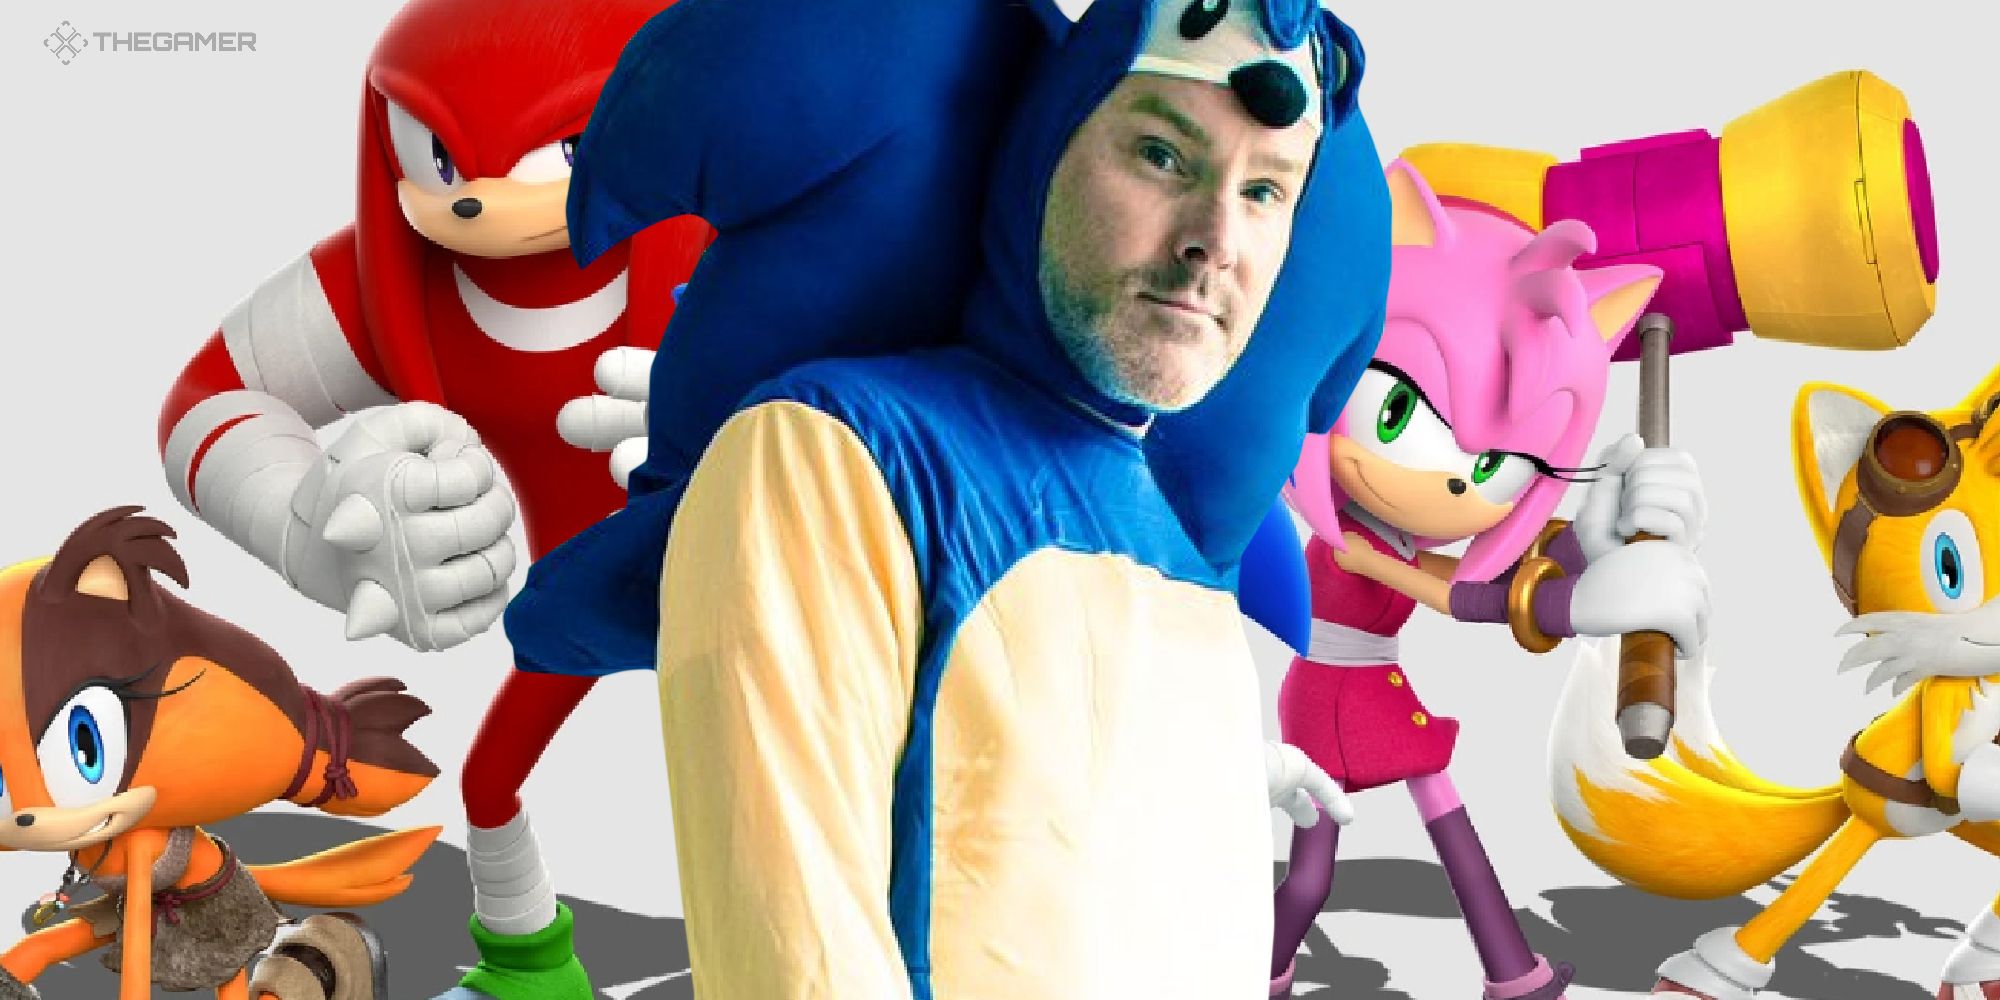  Sonic Boom Super Pack : Roger Craig Smith, Cindy